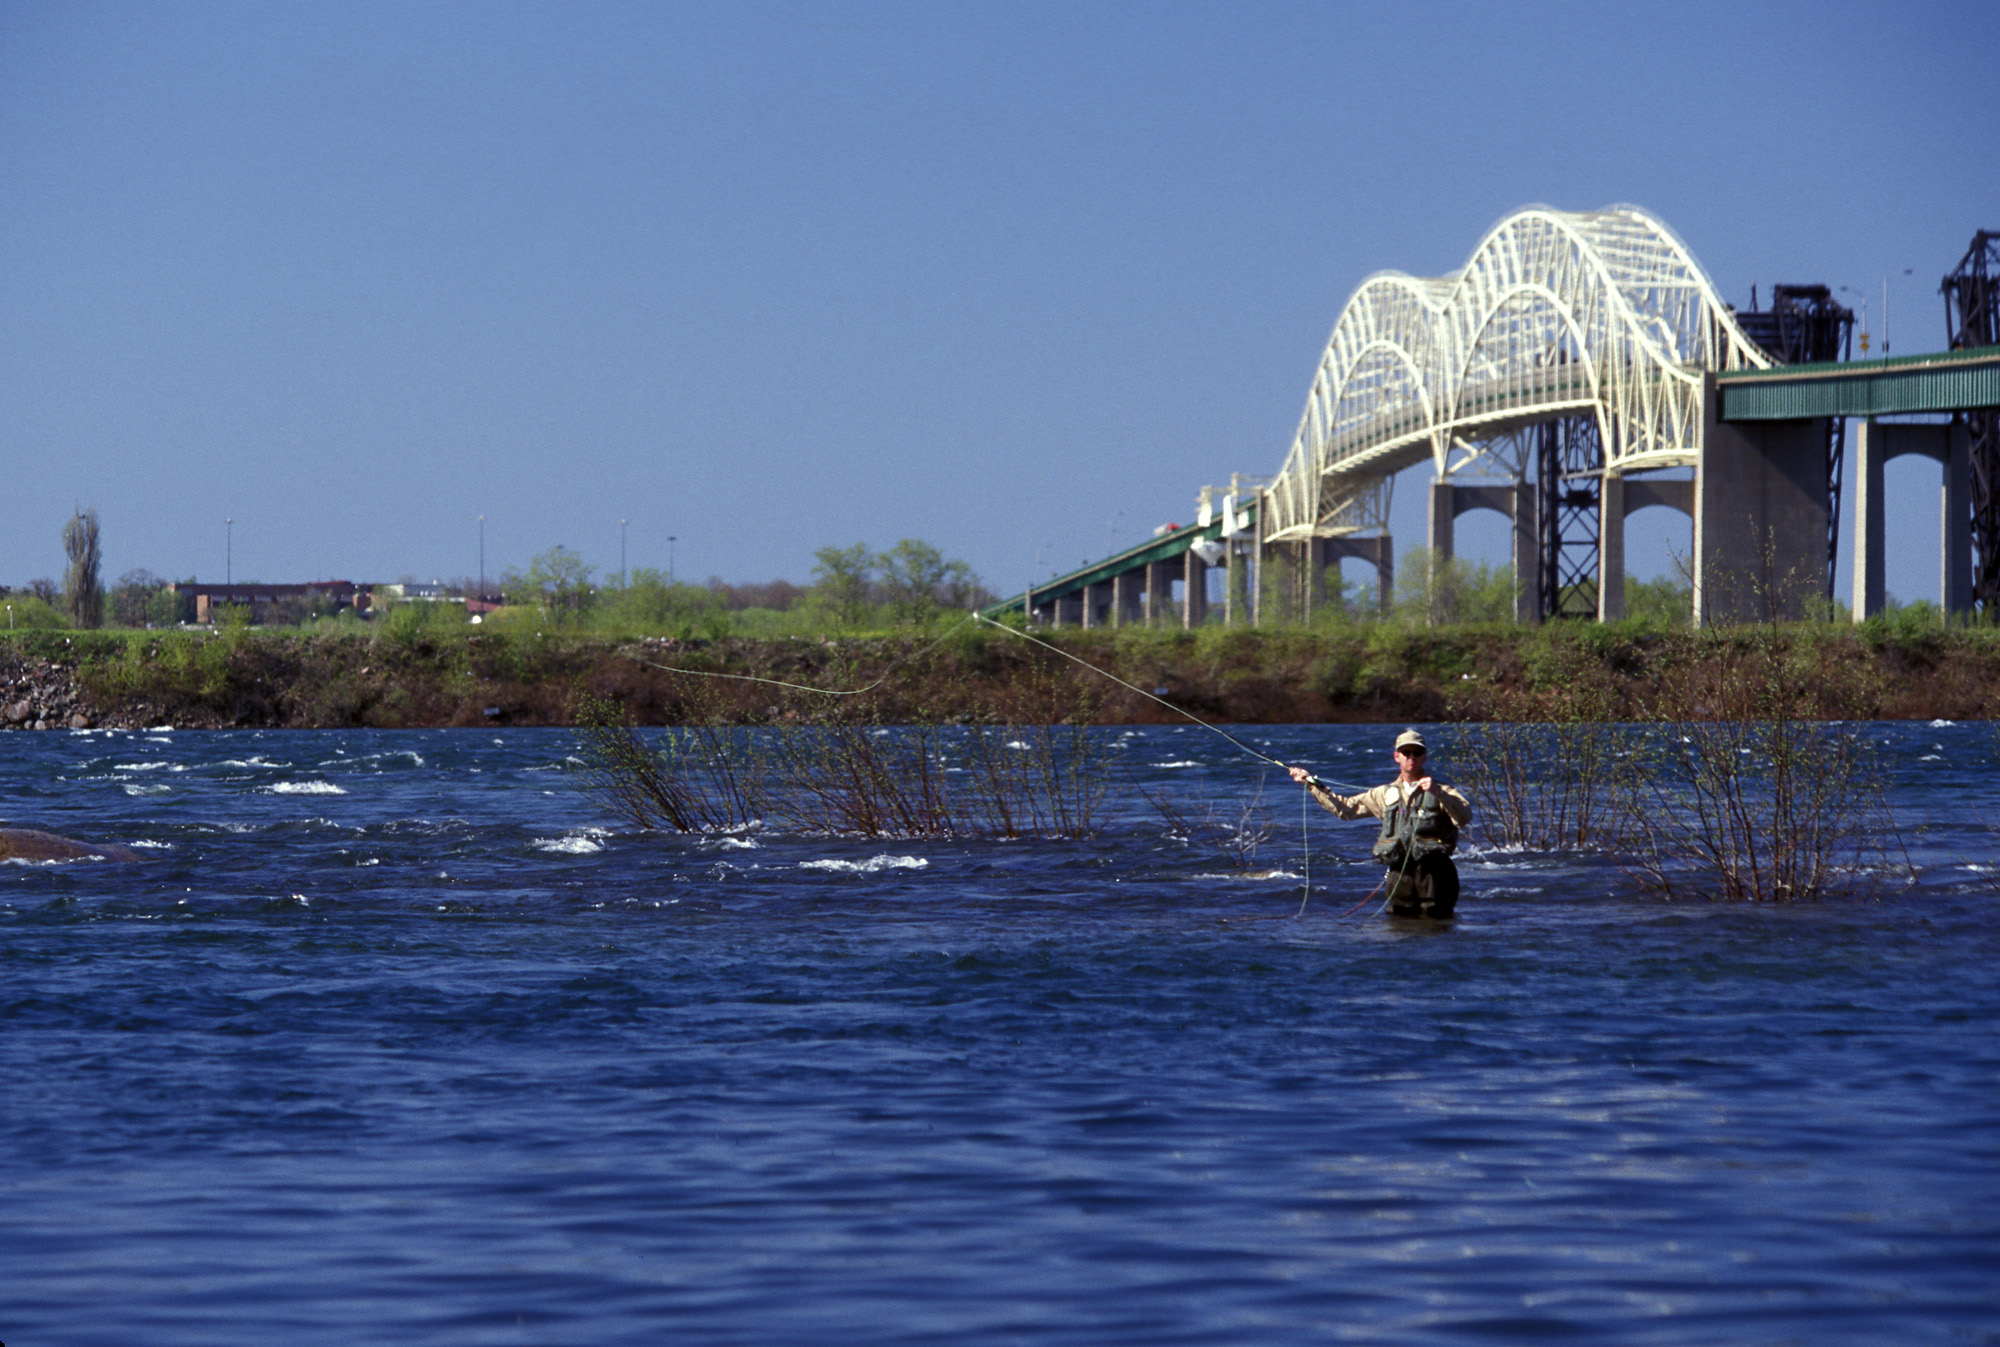 A man standing waist-deep in the very blue St. Mary's River, fly fishing. There is a large bridge, green banks and a clear blue sky in the background.